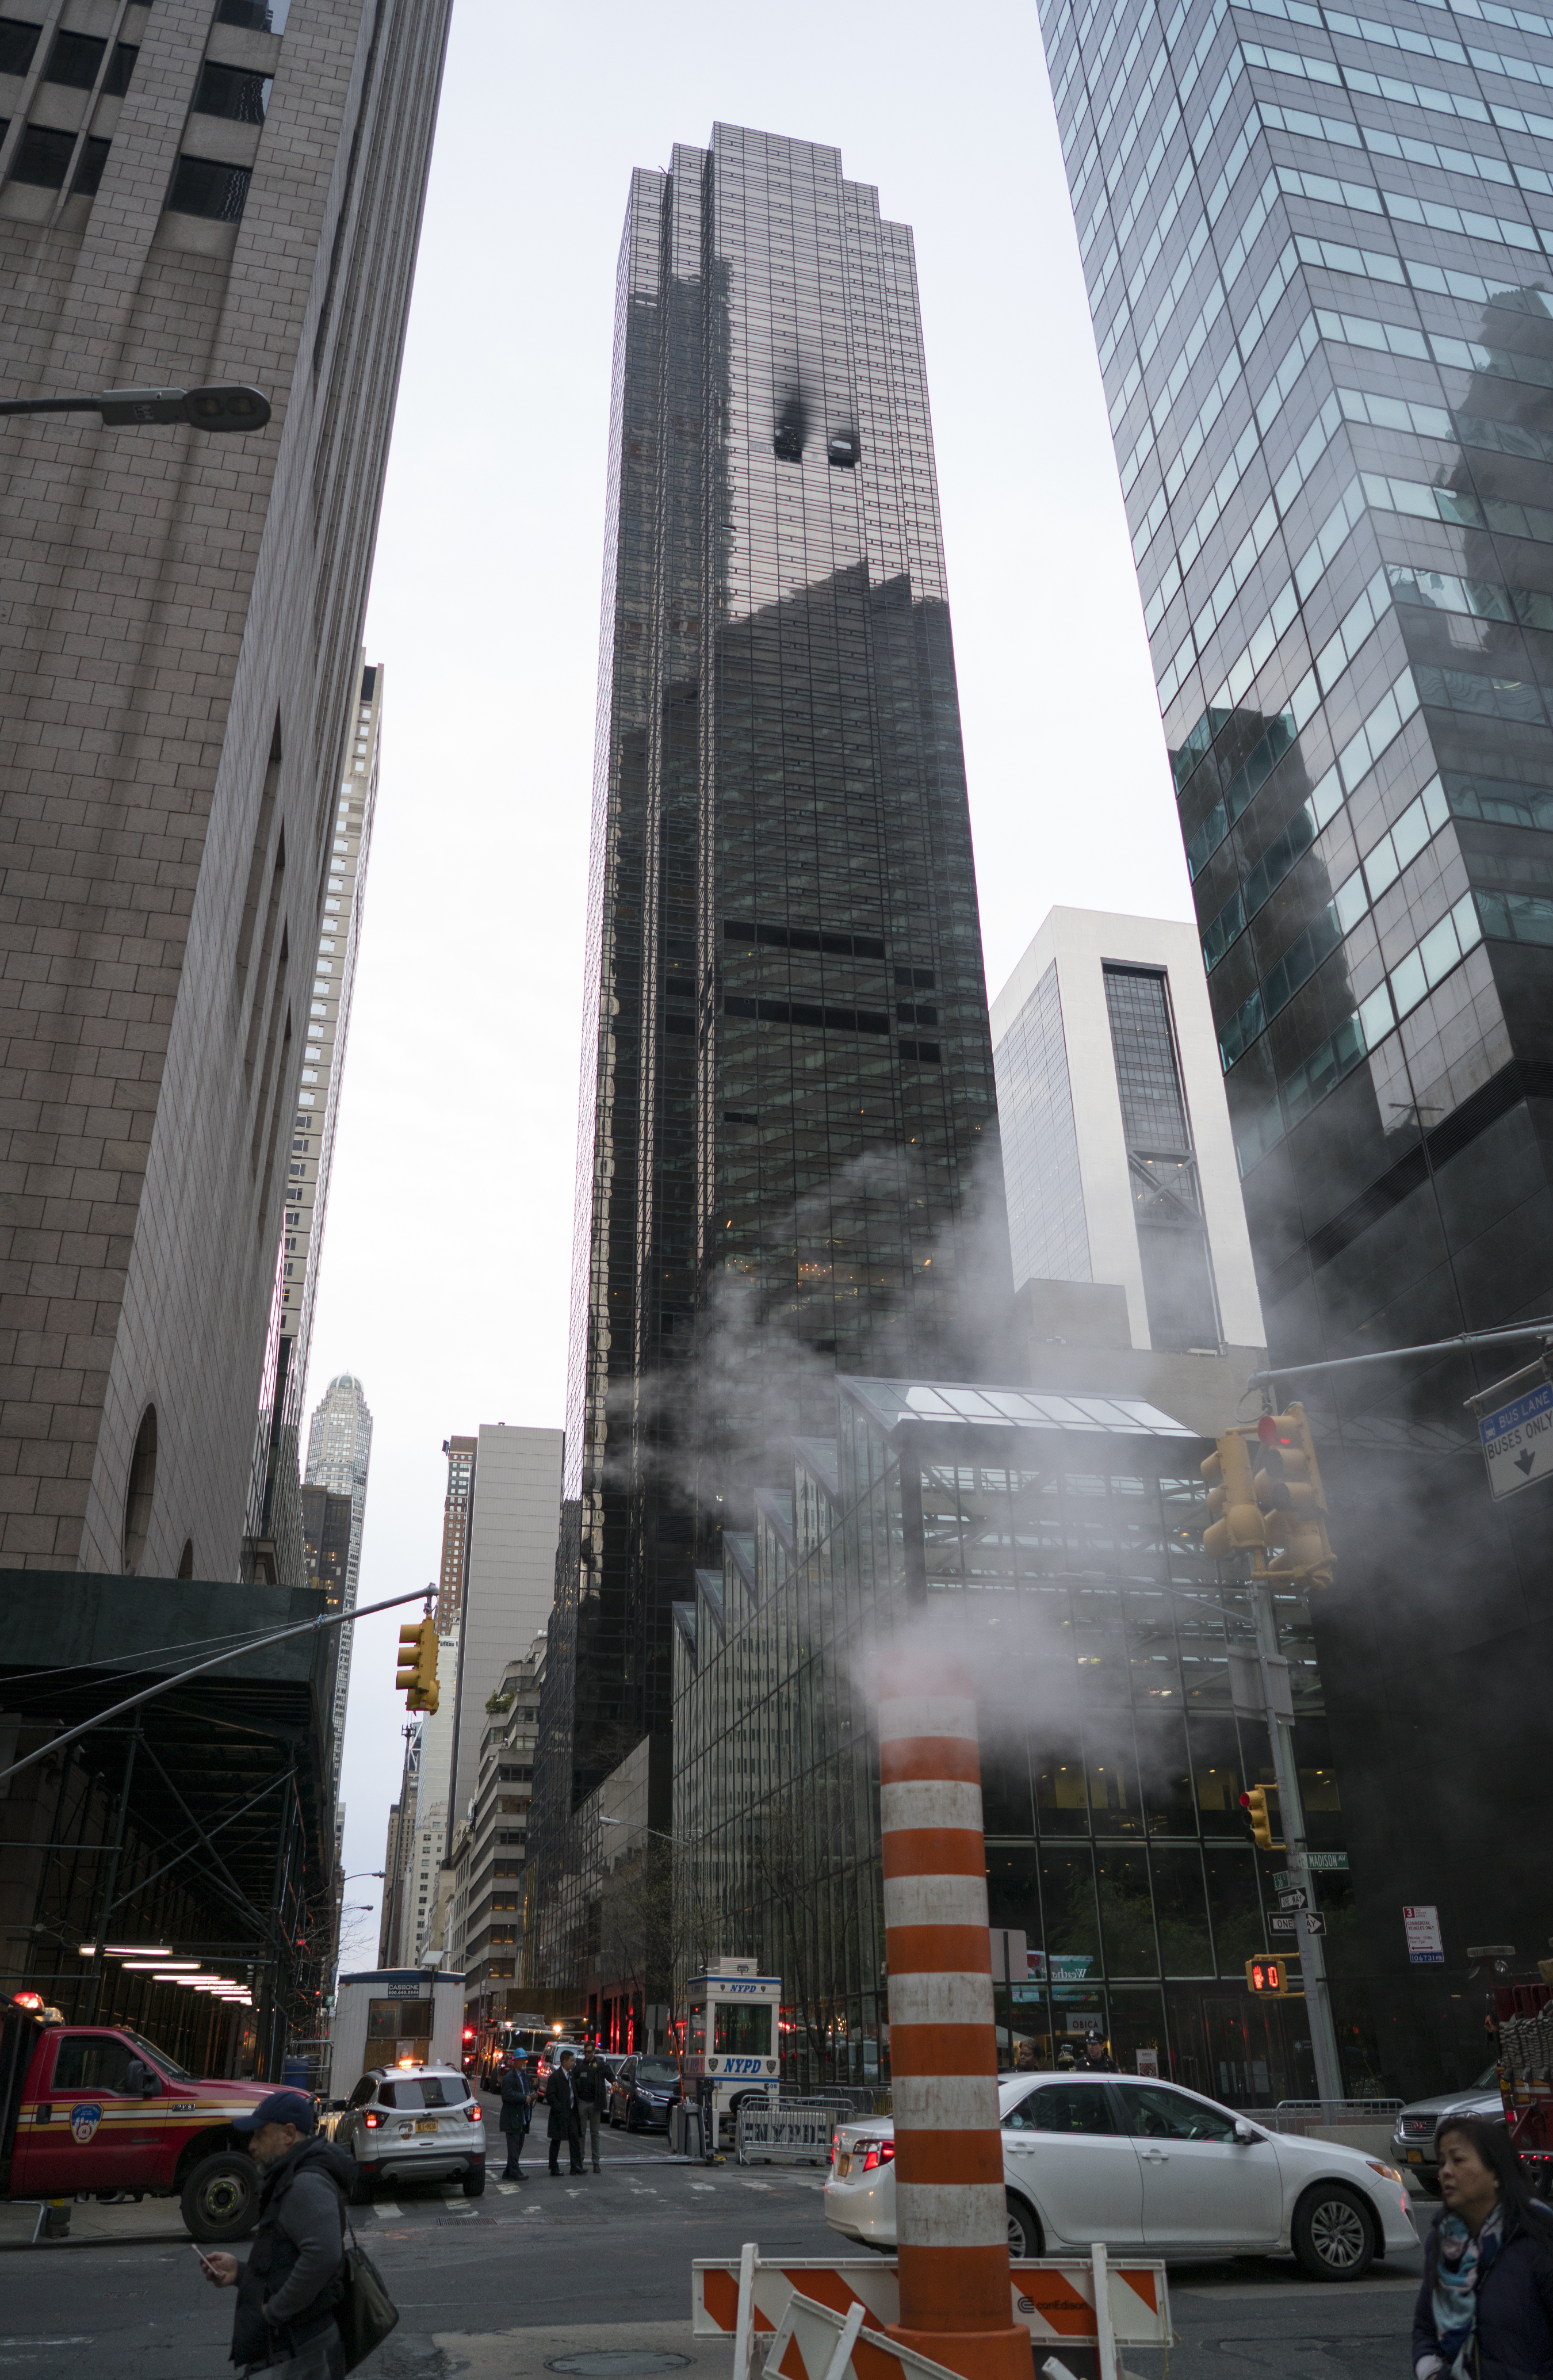 New York - 1 Killed In Fire At Trump Tower In New York